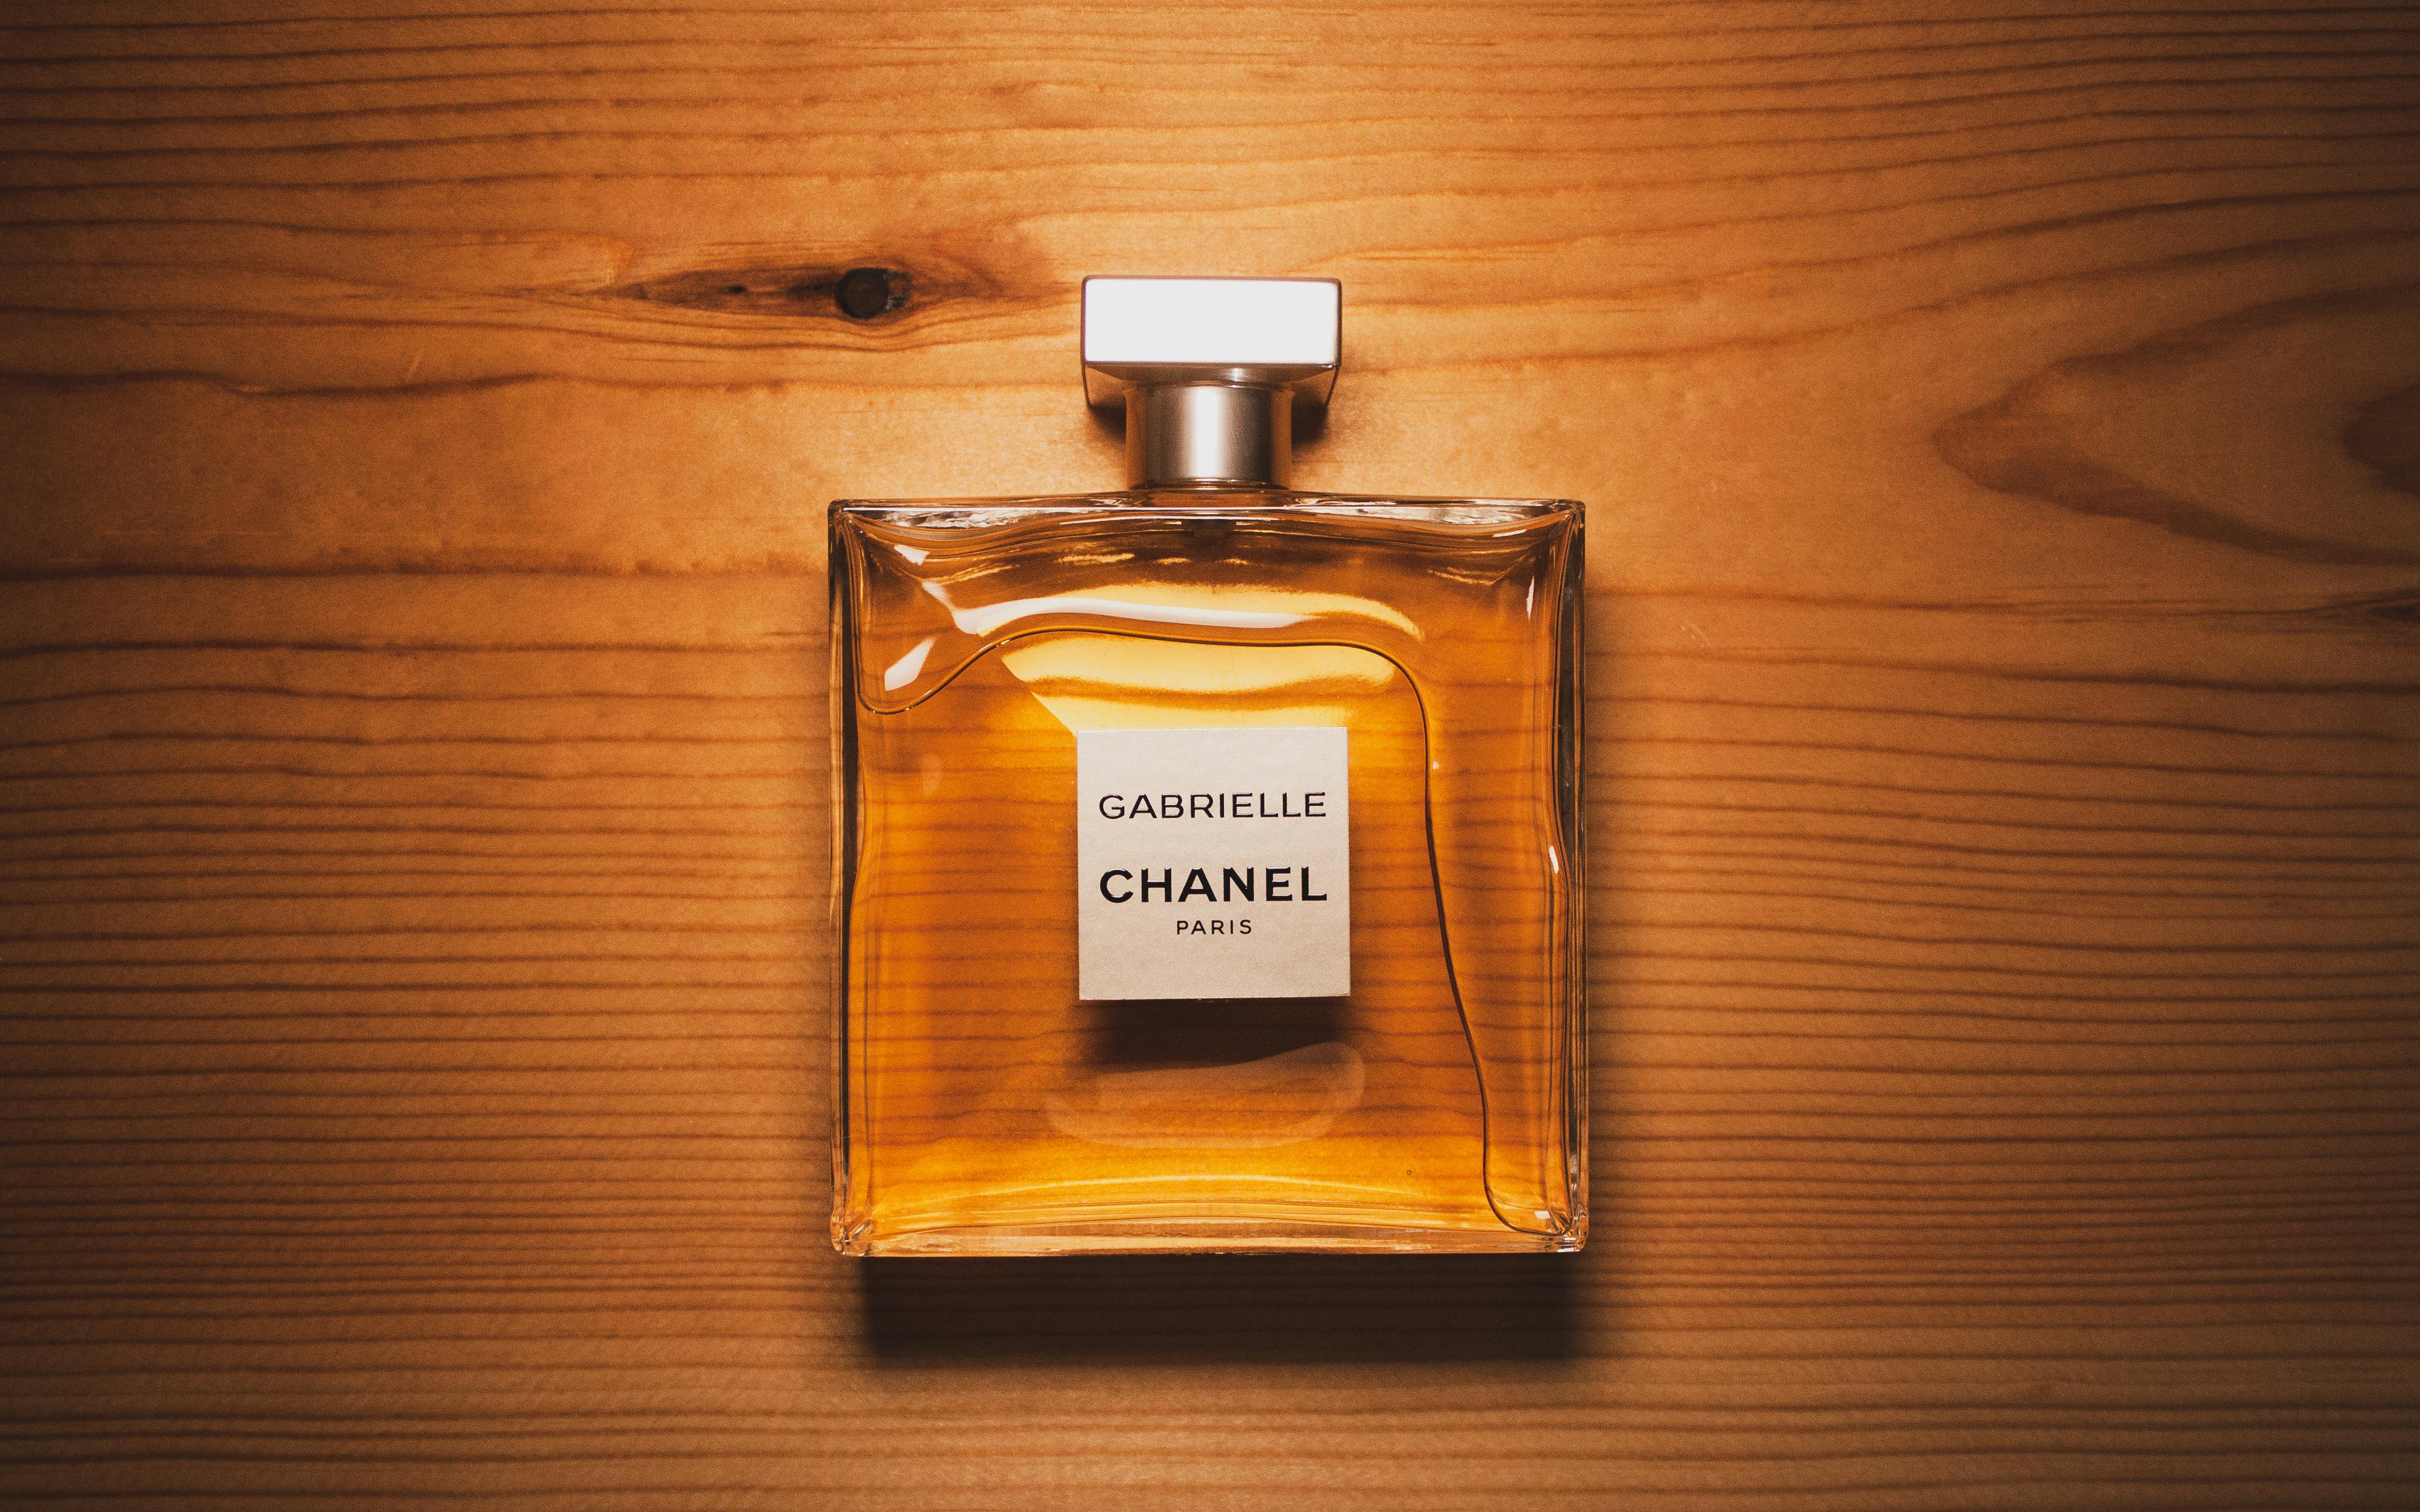 Chanel Photos, Download The BEST Free Chanel Stock Photos & HD Images